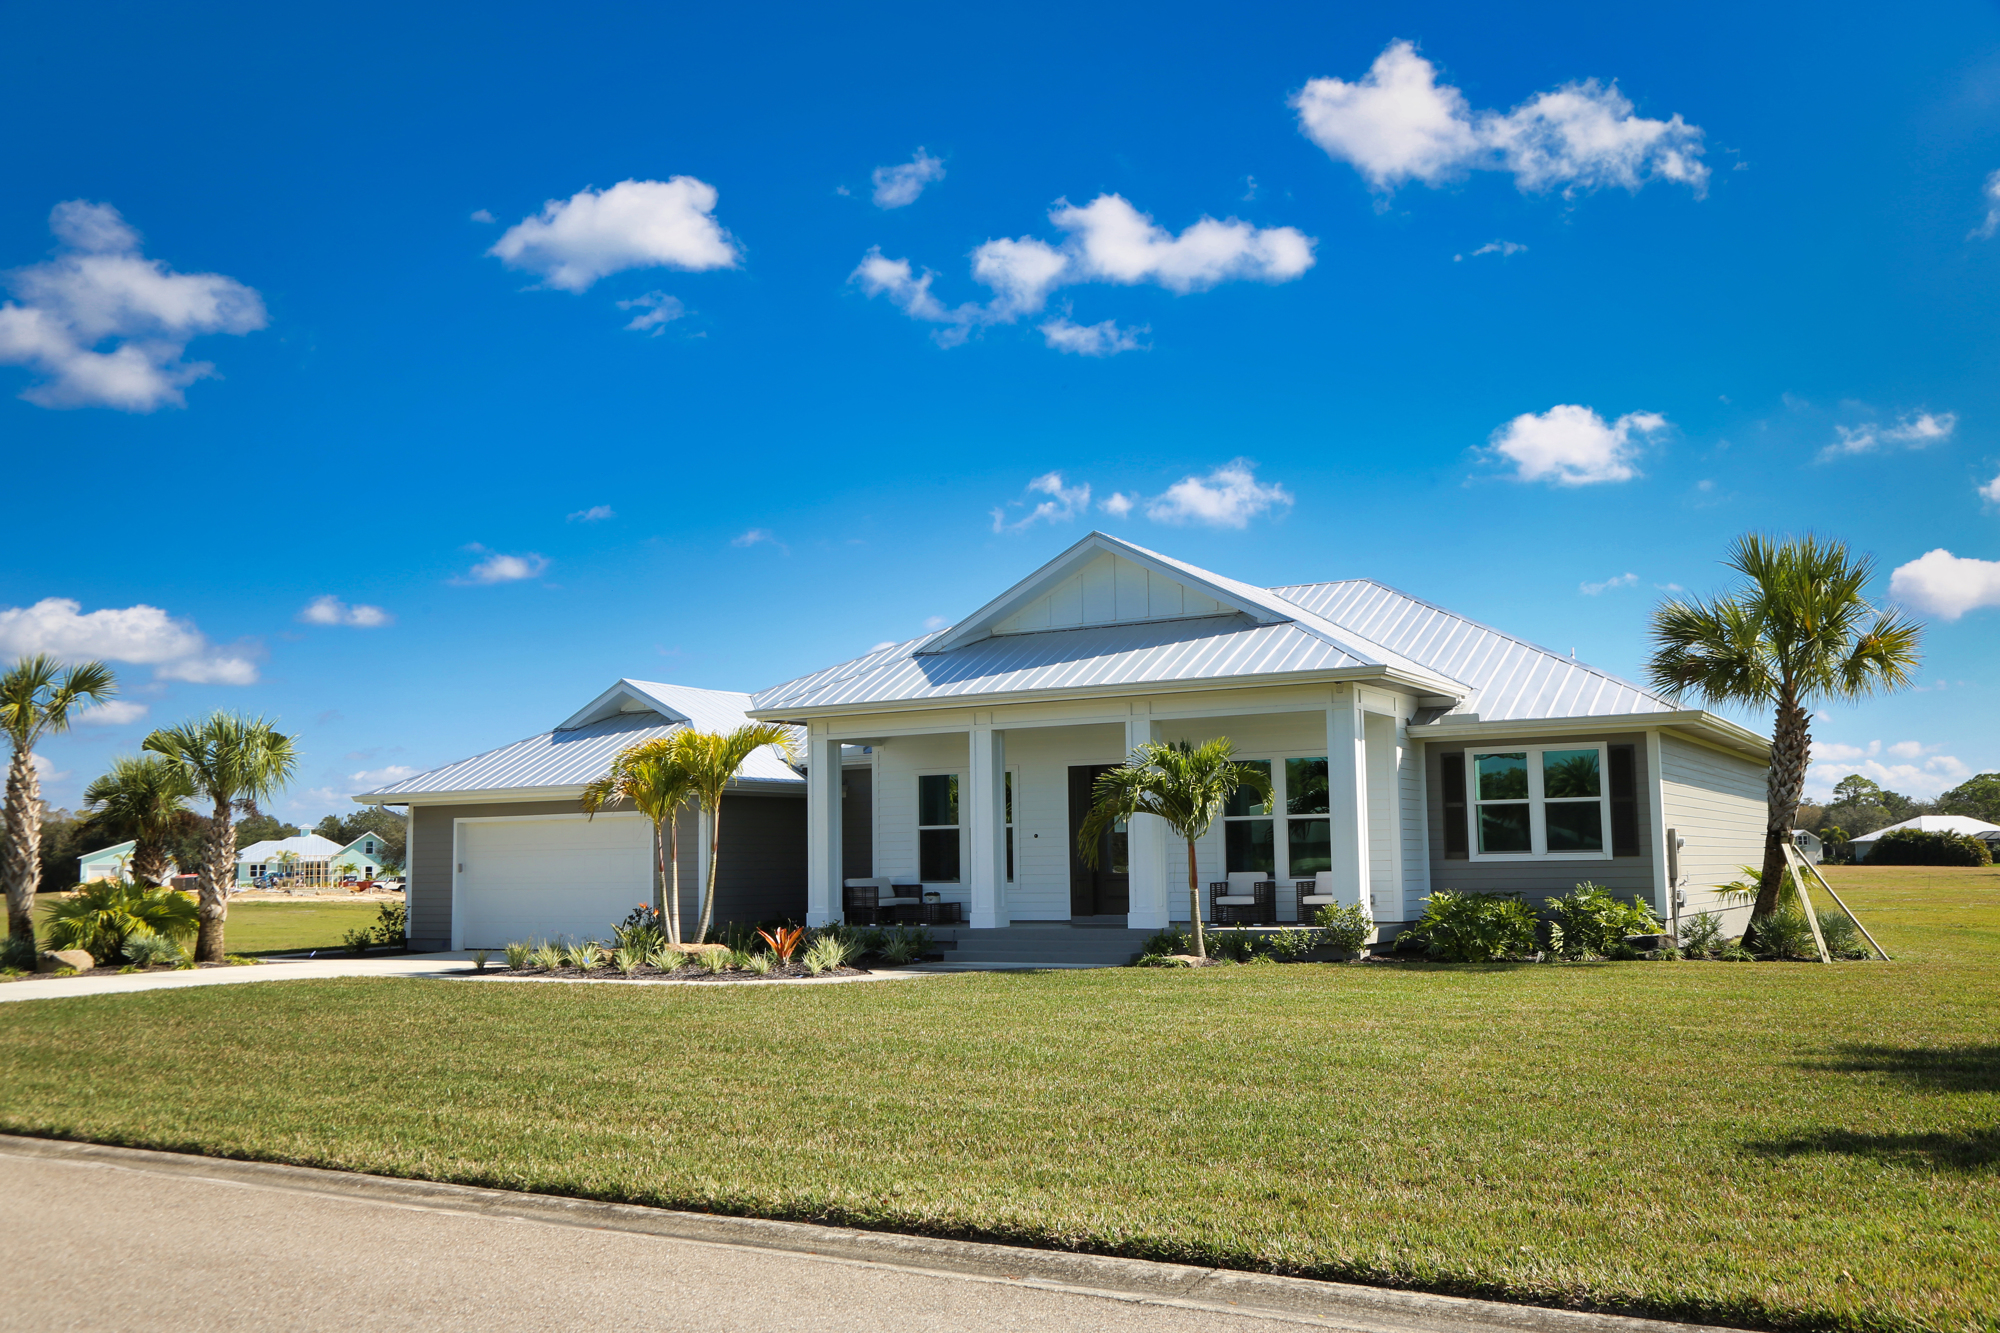 Stefania Pifferi. Daniel Wayne Homes owner Dan Dodrill says being flexible to quickly changing demand is key to succeeding in the Southwest Florida new homes market.